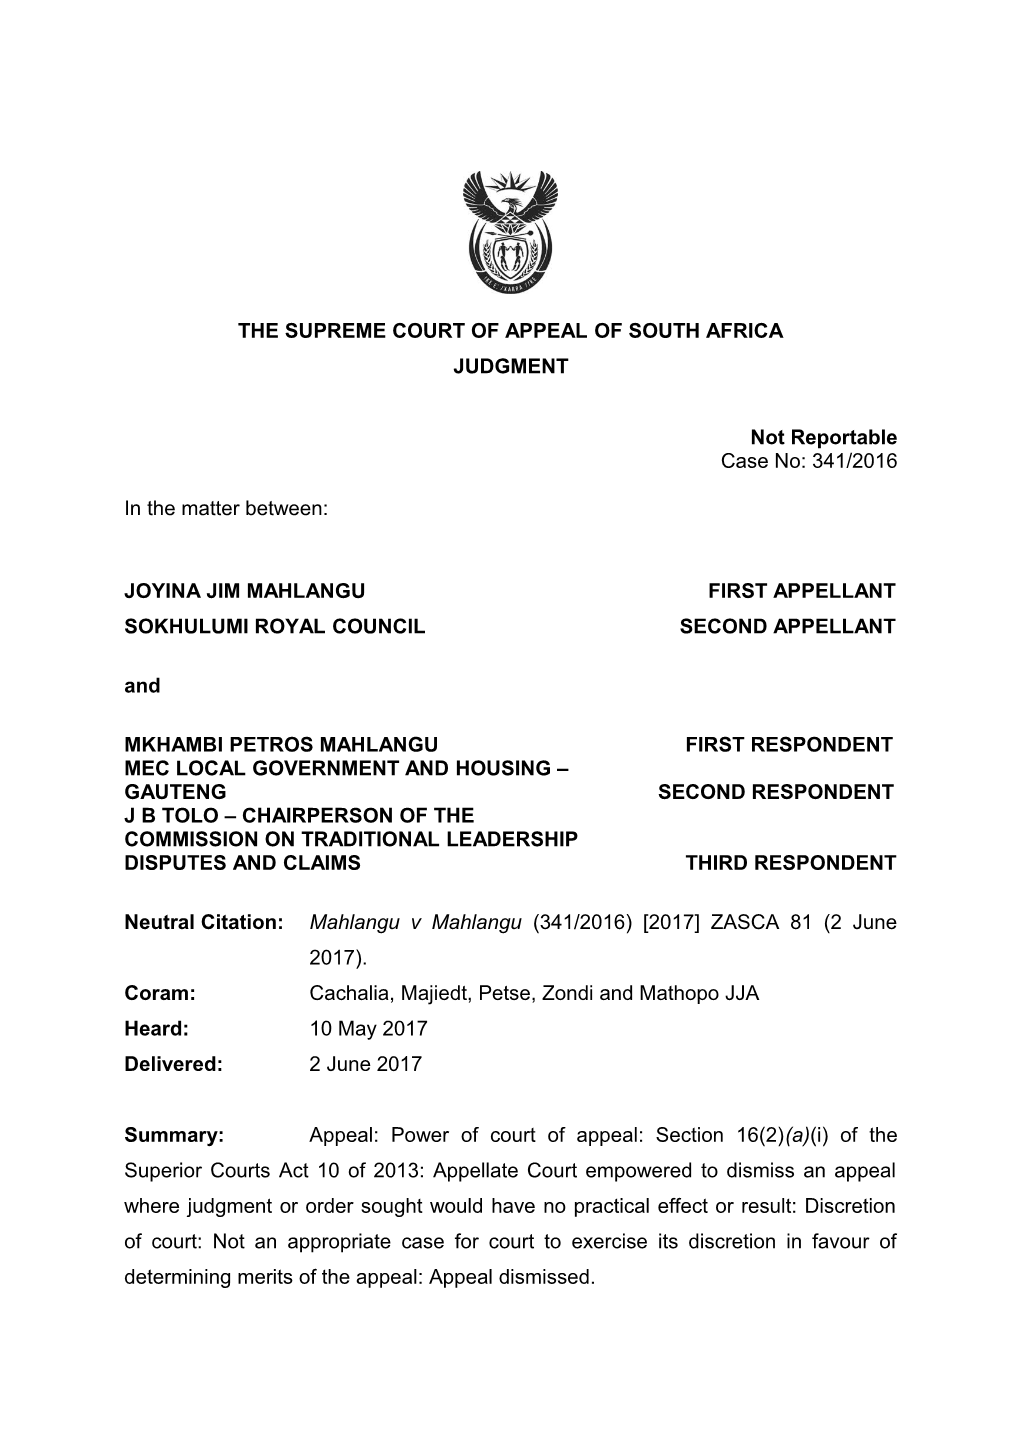 The Supreme Court of Appeal of South Africa